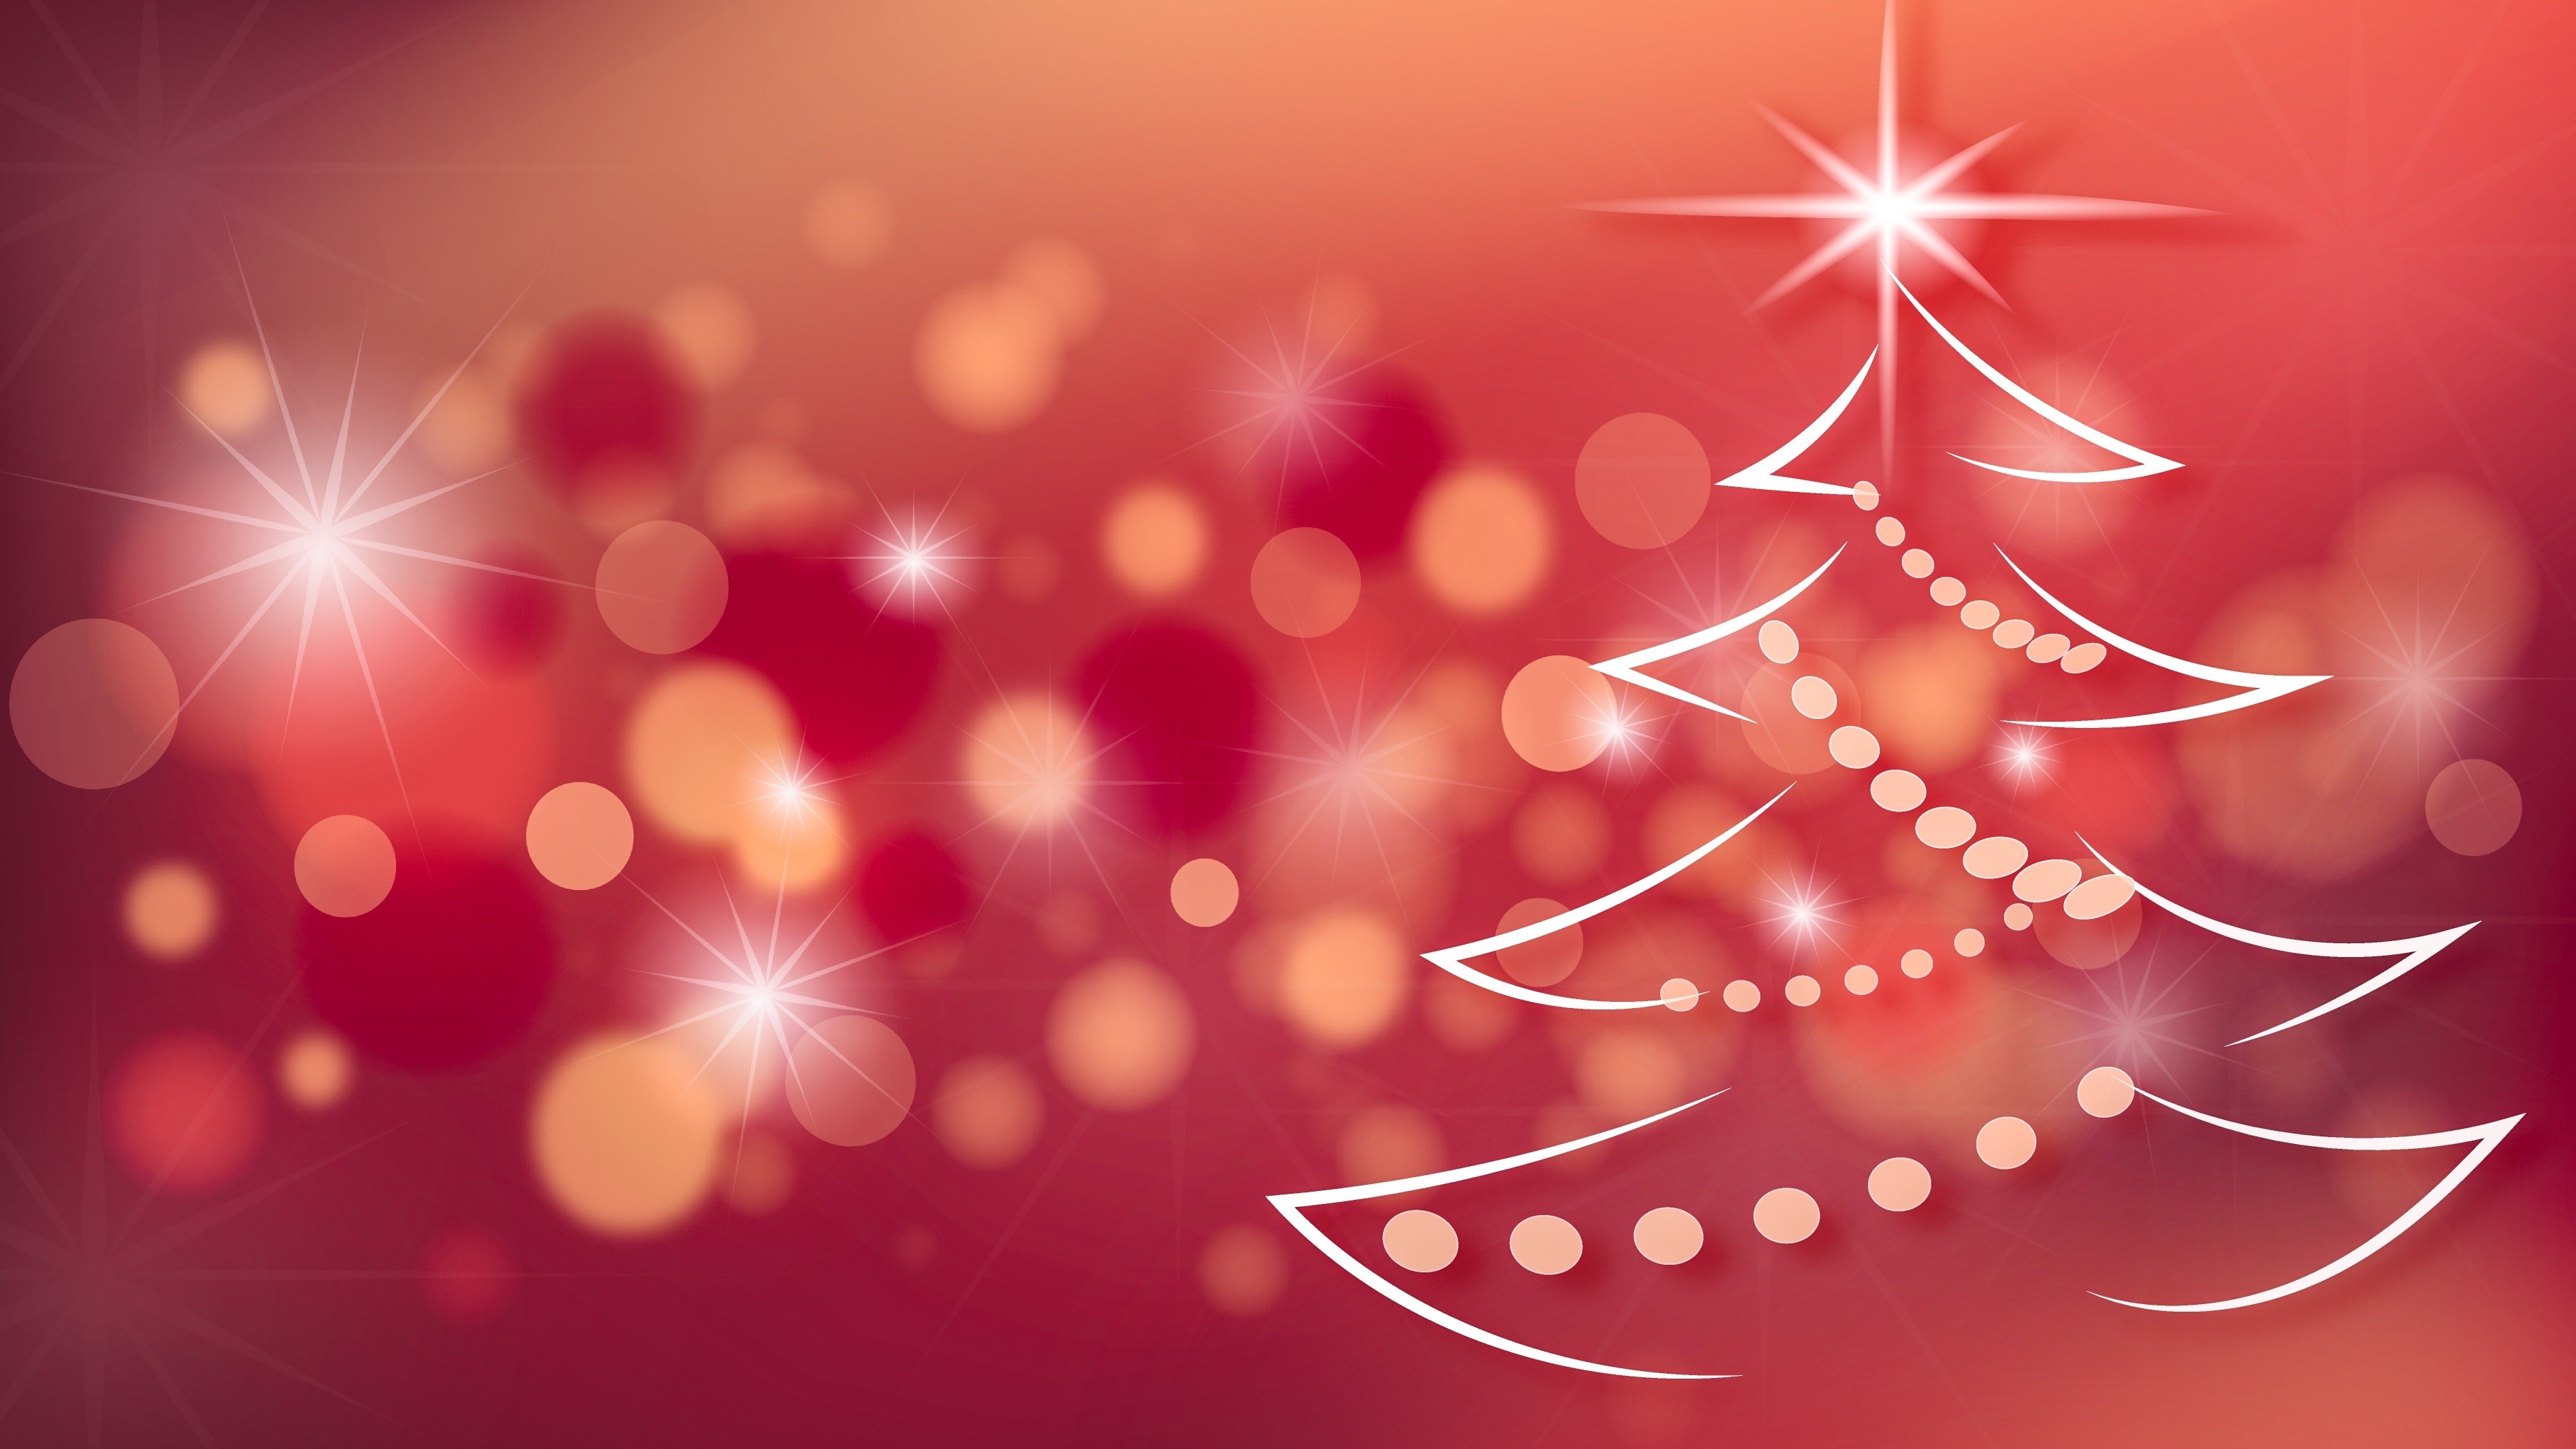 Related Post - Christmas Background For Laptop , HD Wallpaper & Backgrounds